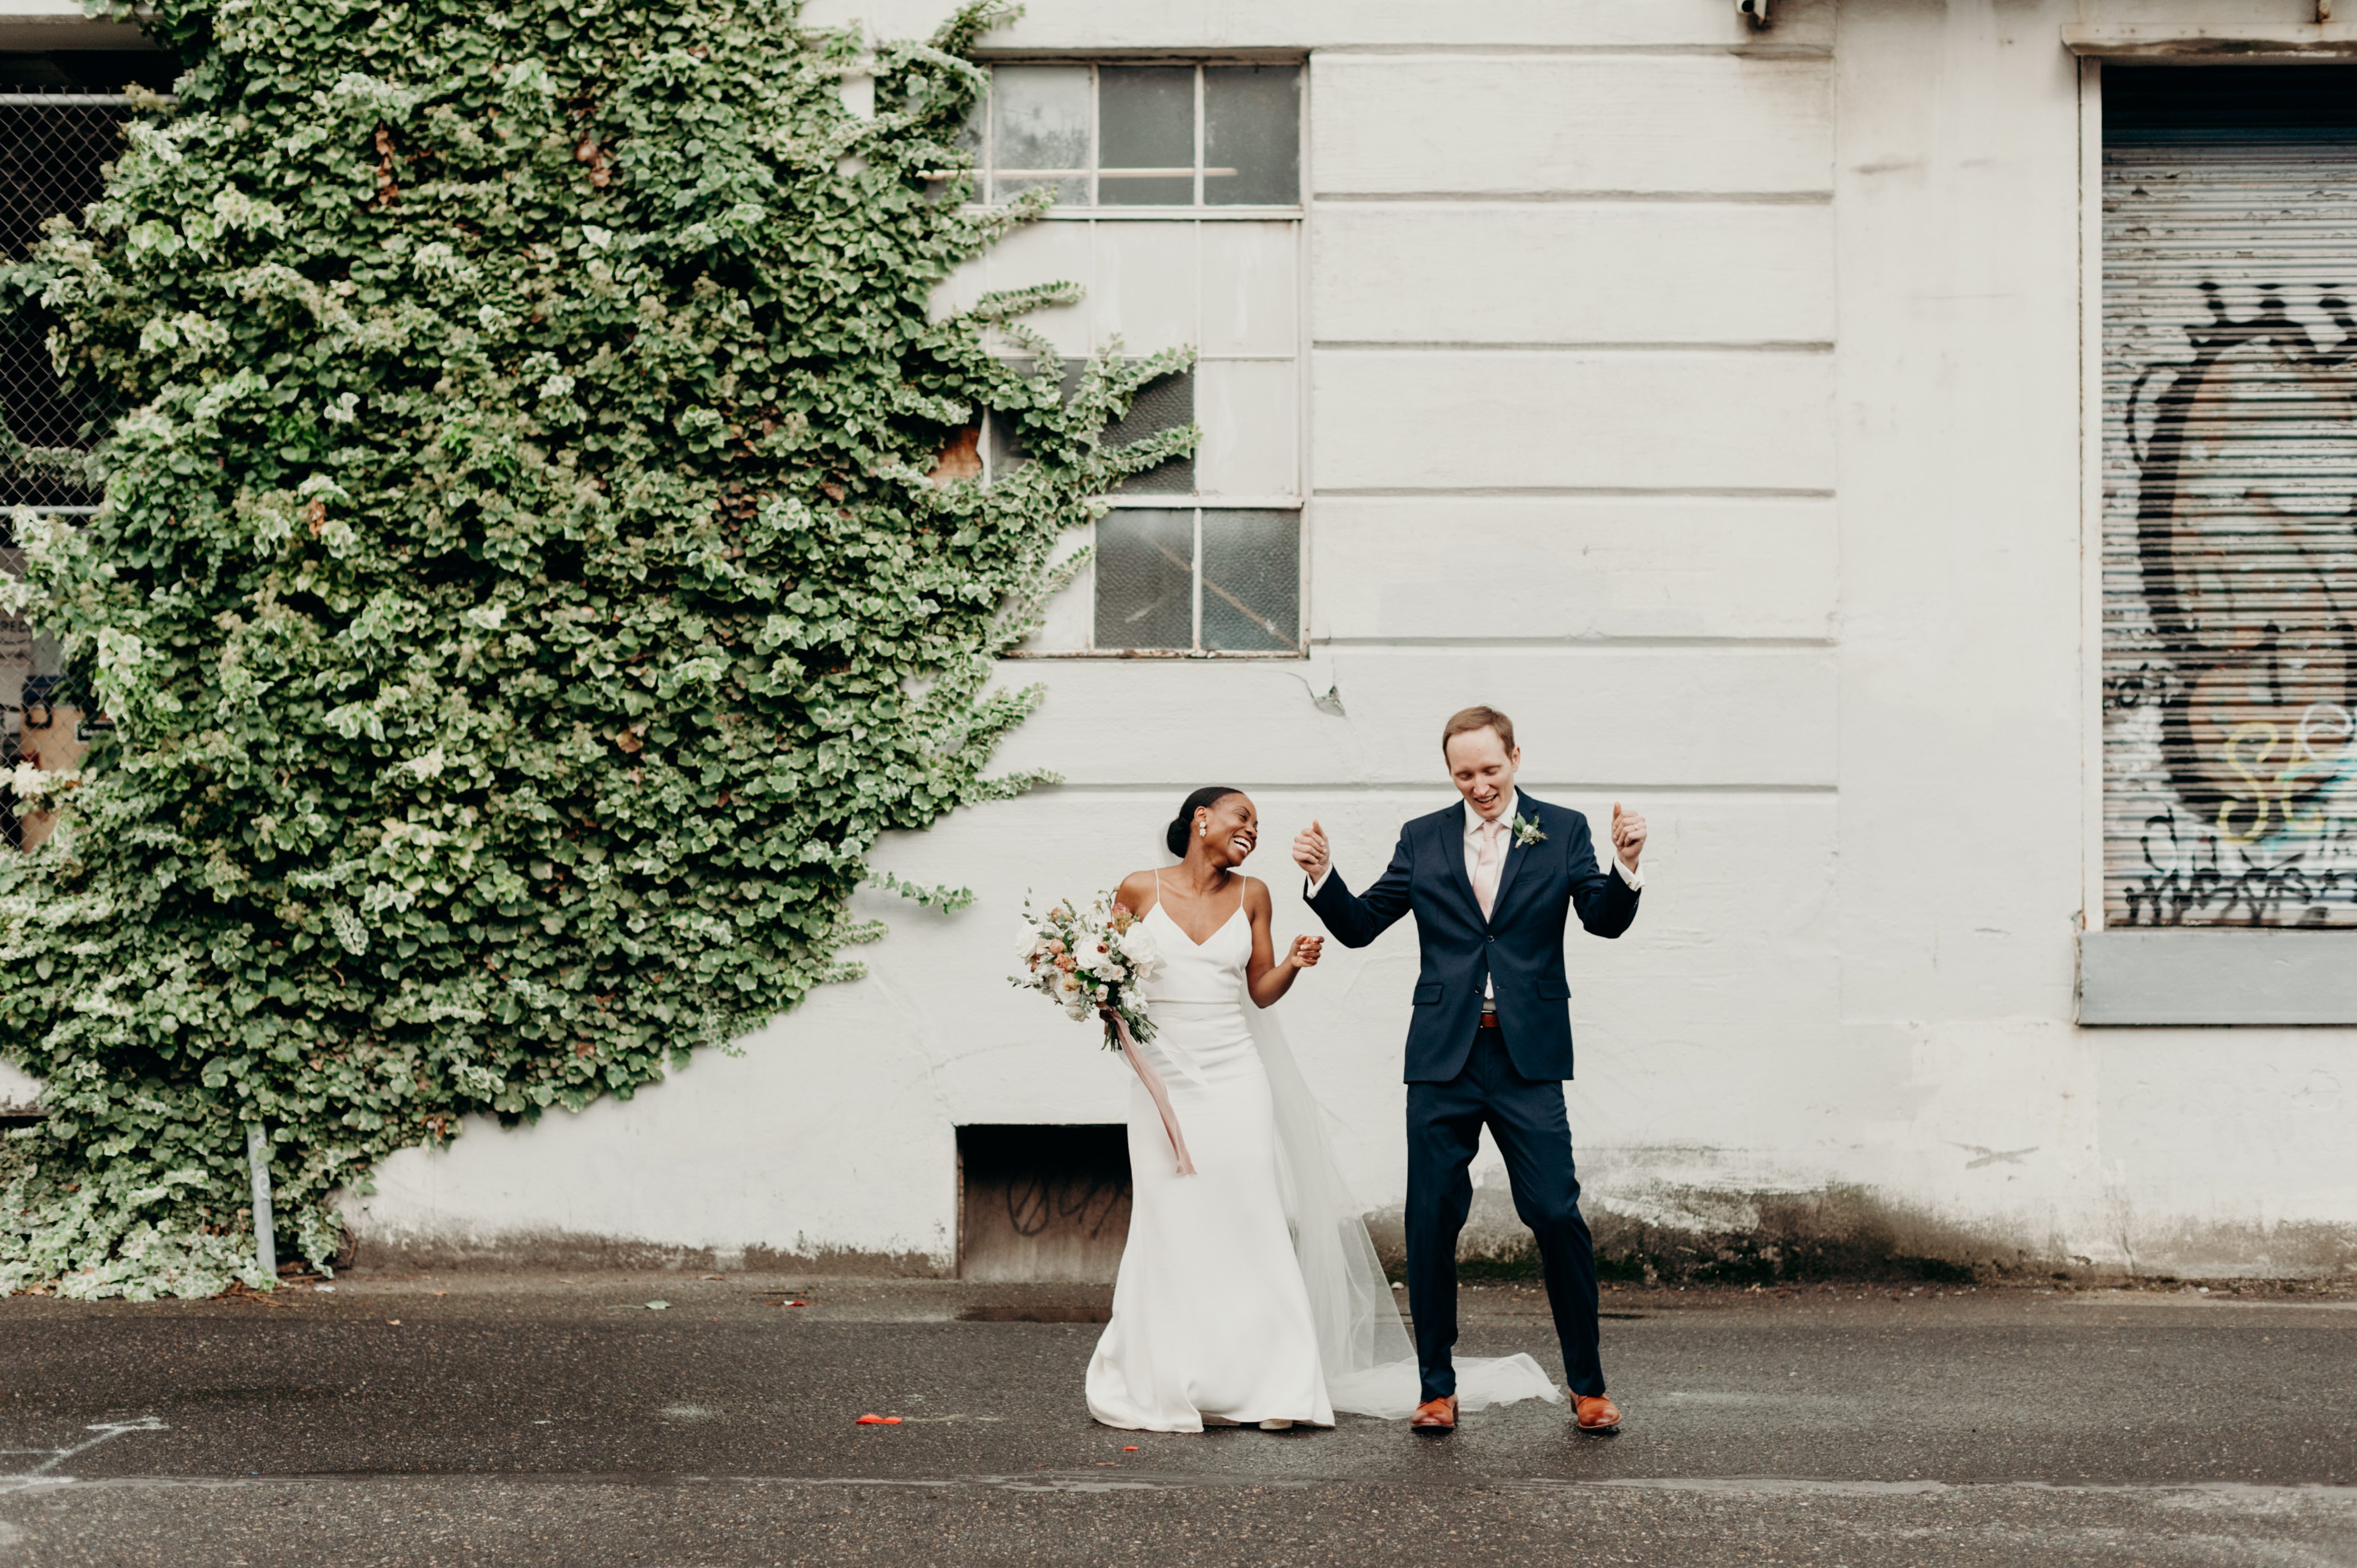 A bride and groom feeling all the happy vibes during their stress-free wedding in Portland, Oregon